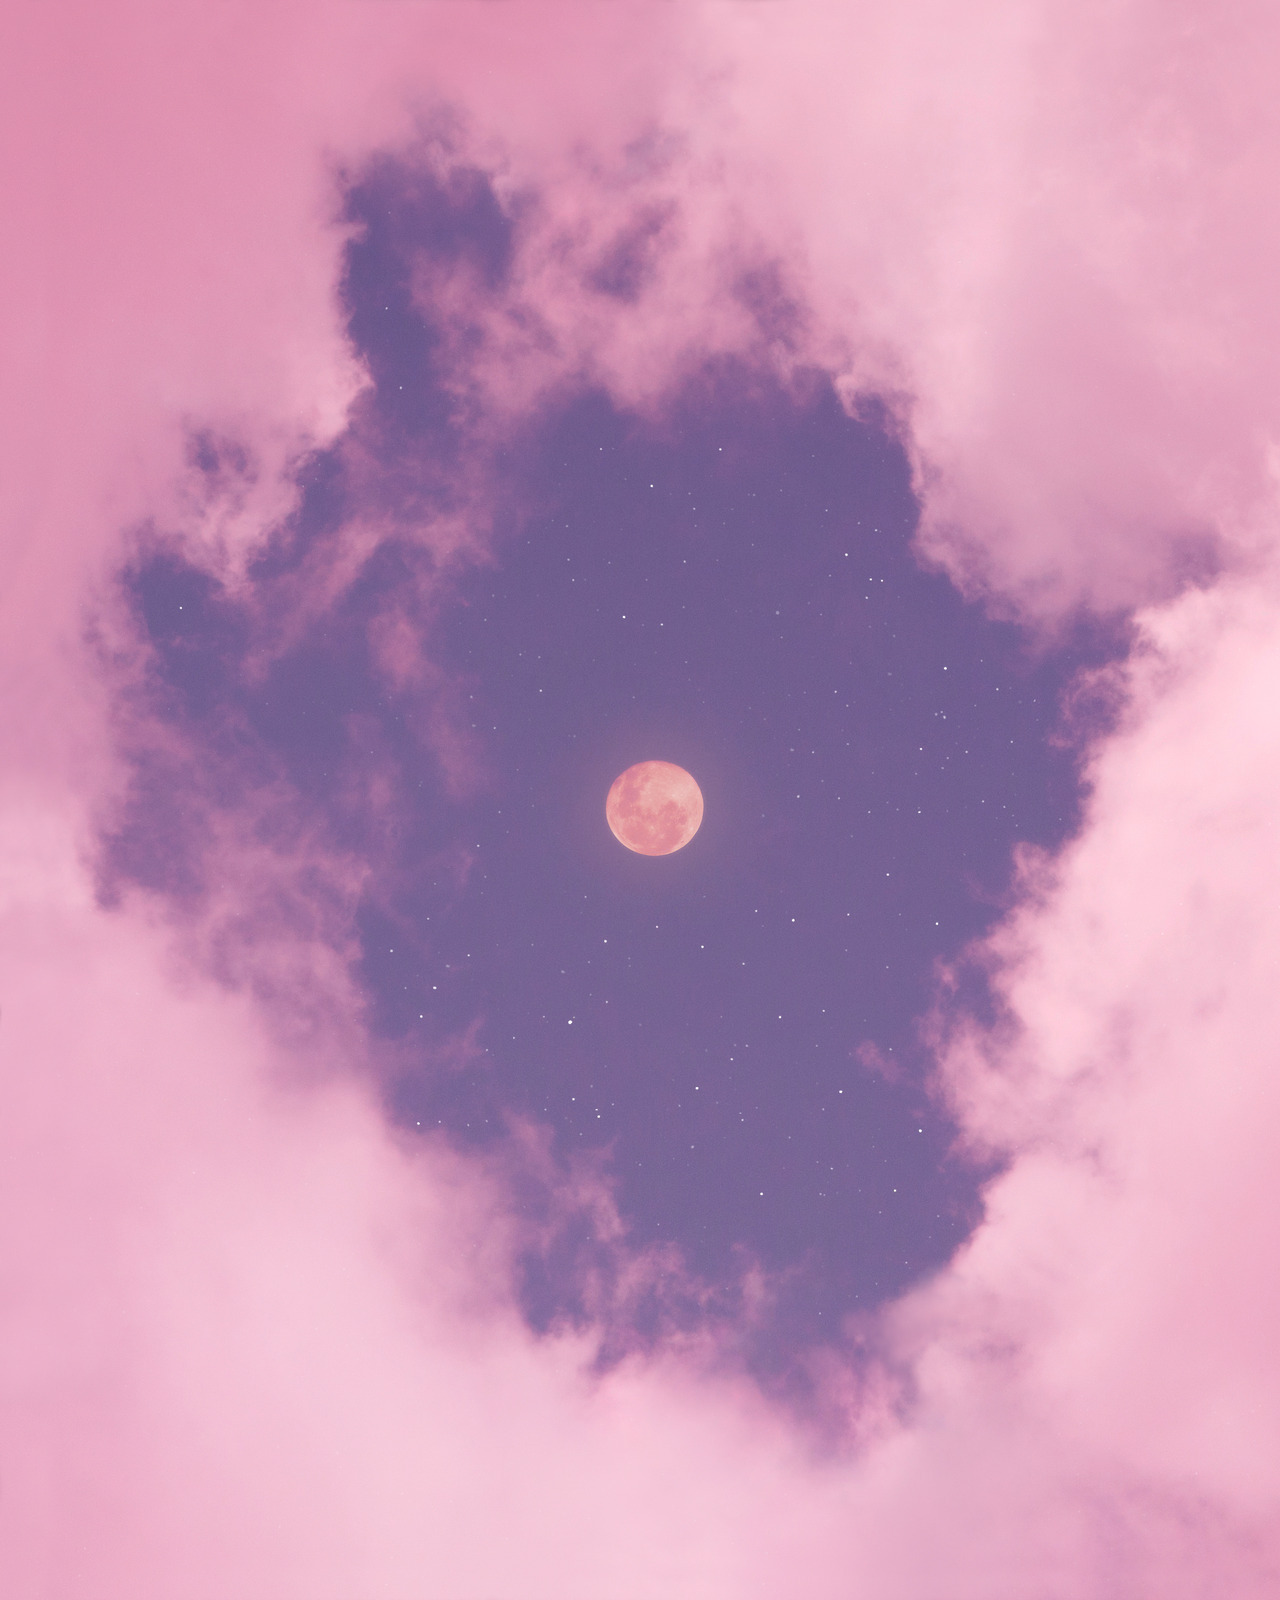 Vintage Aesthetic Clouds Wallpapers